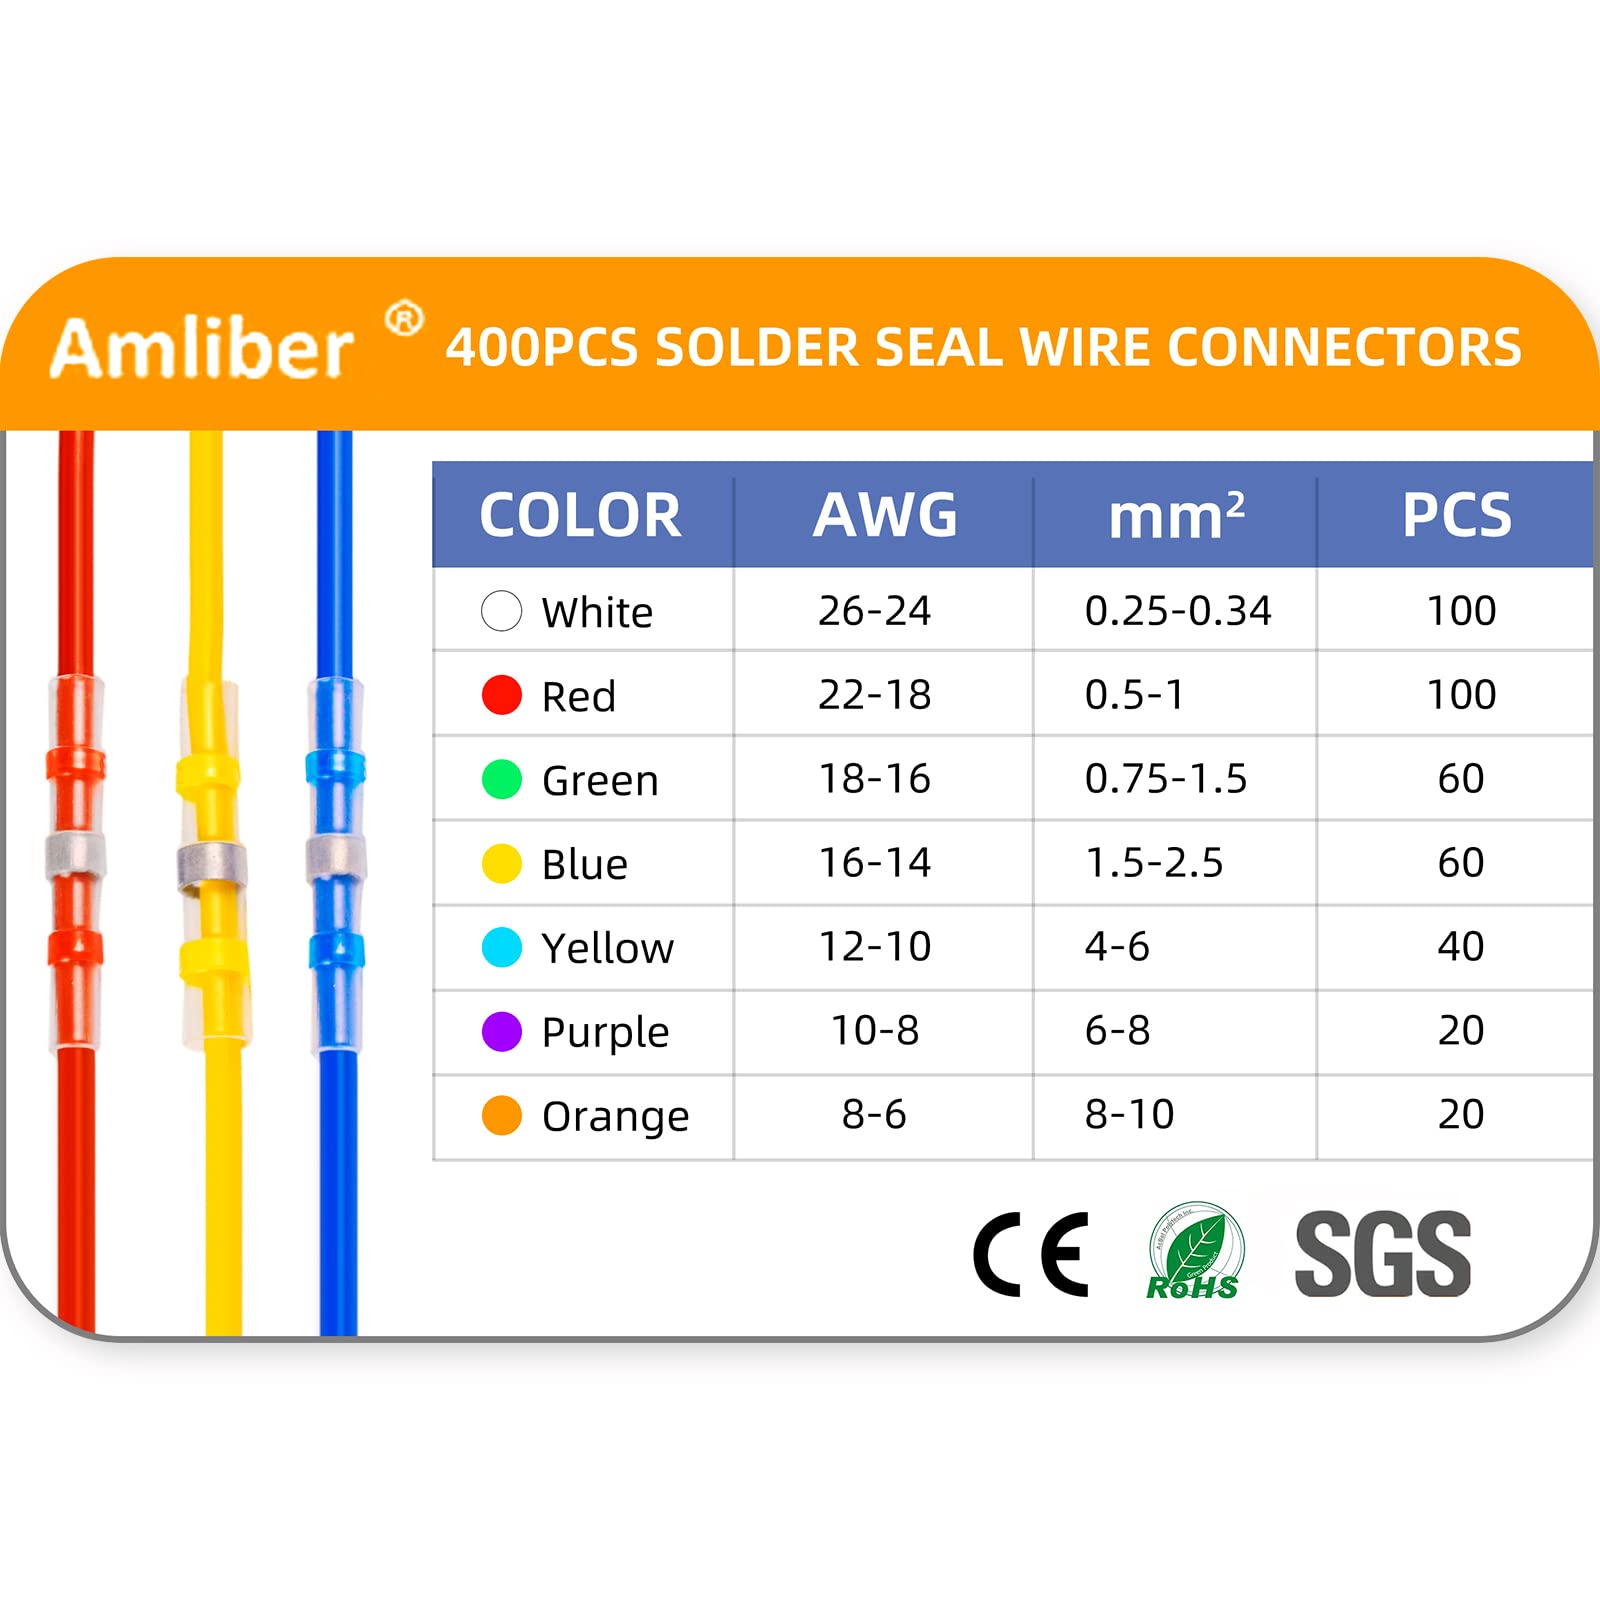 Amliber 400PCS Solder Seal Wire Connectors 26-6 Gauge, Heat Shrink Butt Connectors Solderstick Waterproof Wire Electrical Connector Kit for Marine Automotive Boat Truck Wire Joint